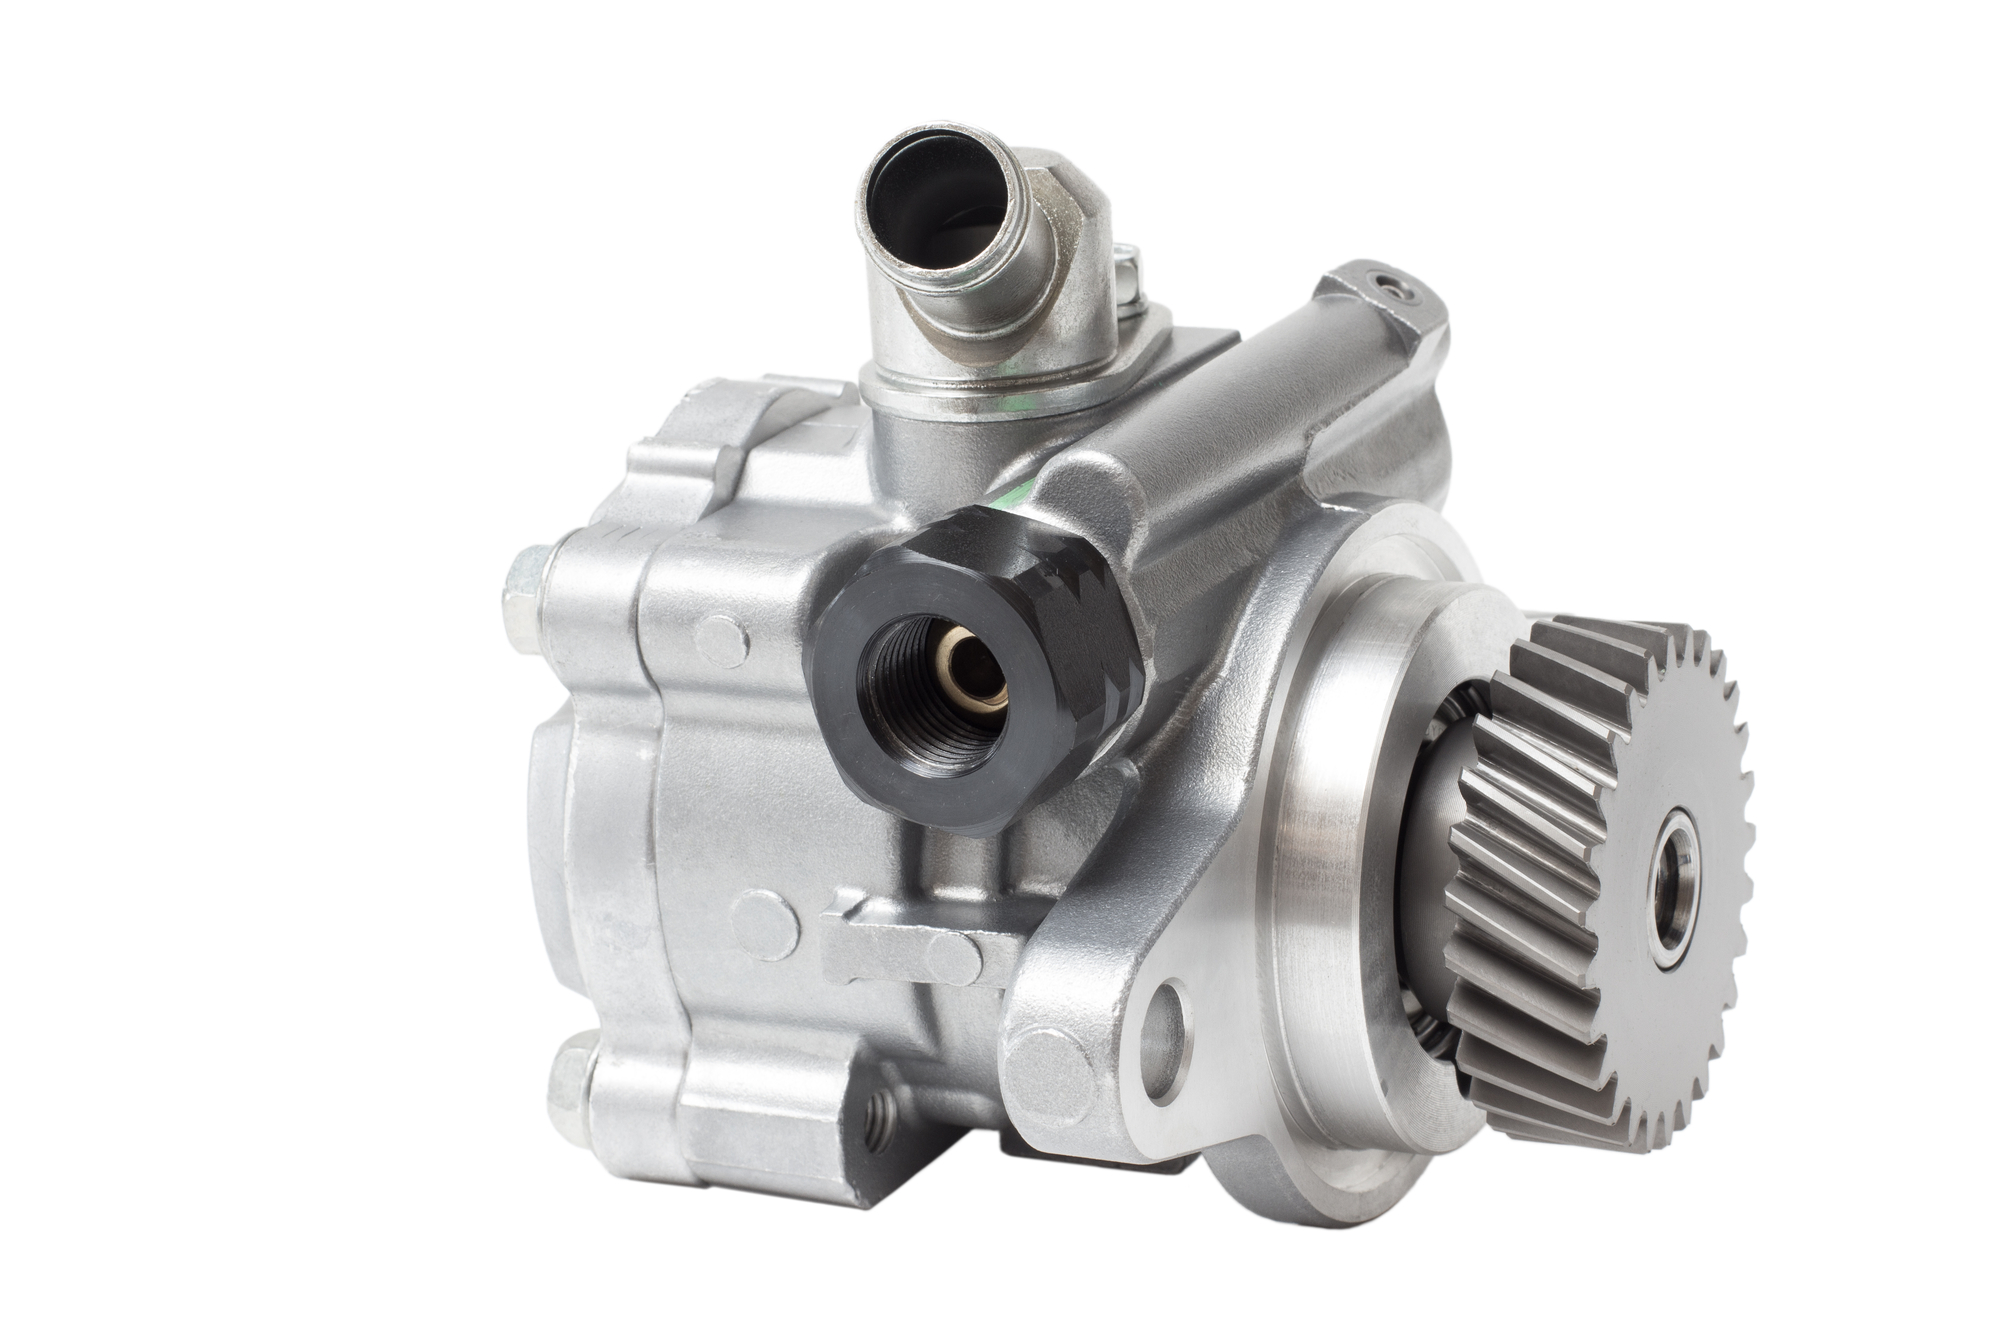 How Much Does It Cost To Replace An Oil Pump?